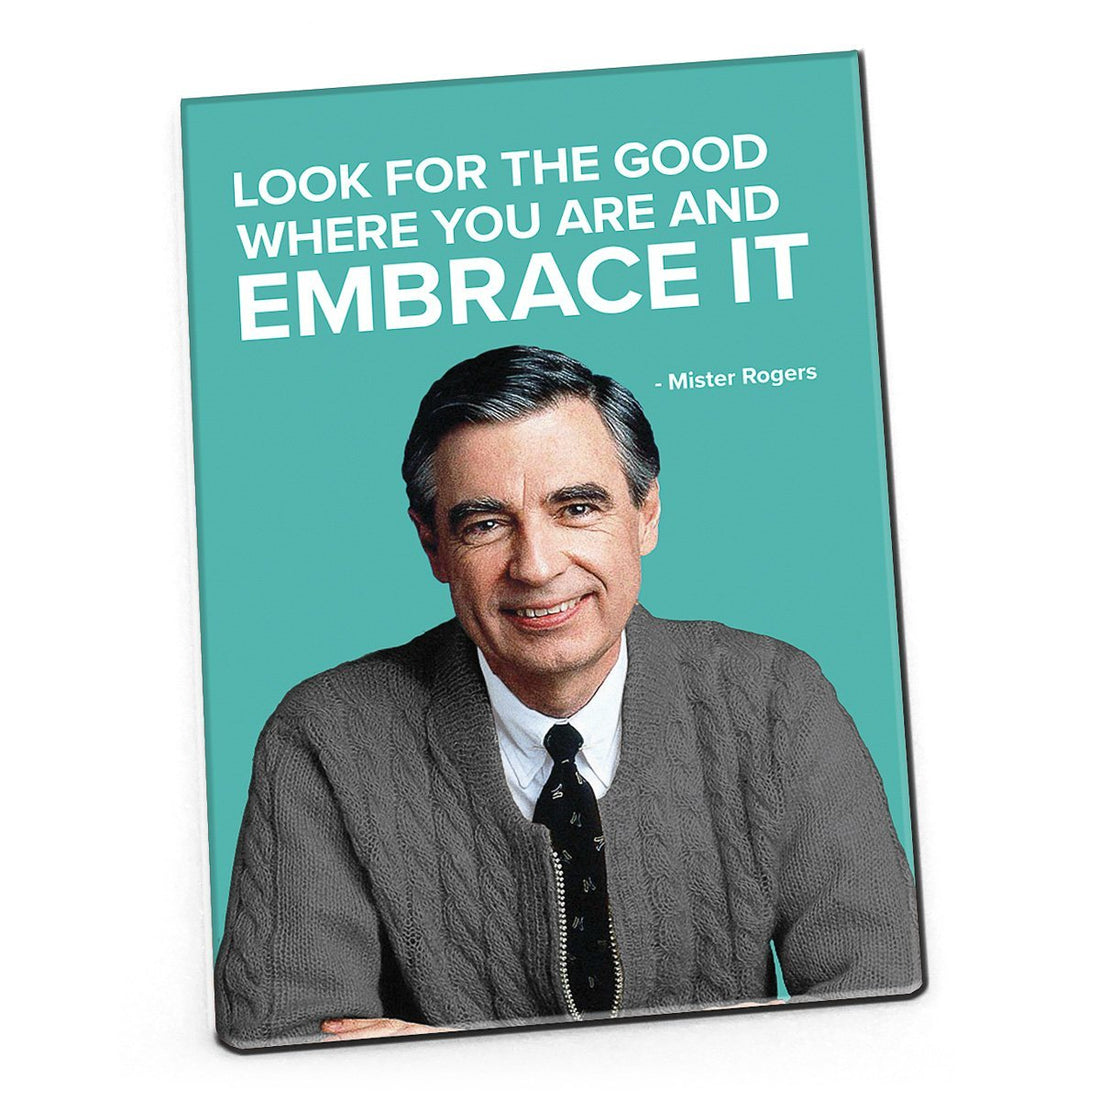 Mister Rogers Quote Magnet: "Look for the Good Where You Are"